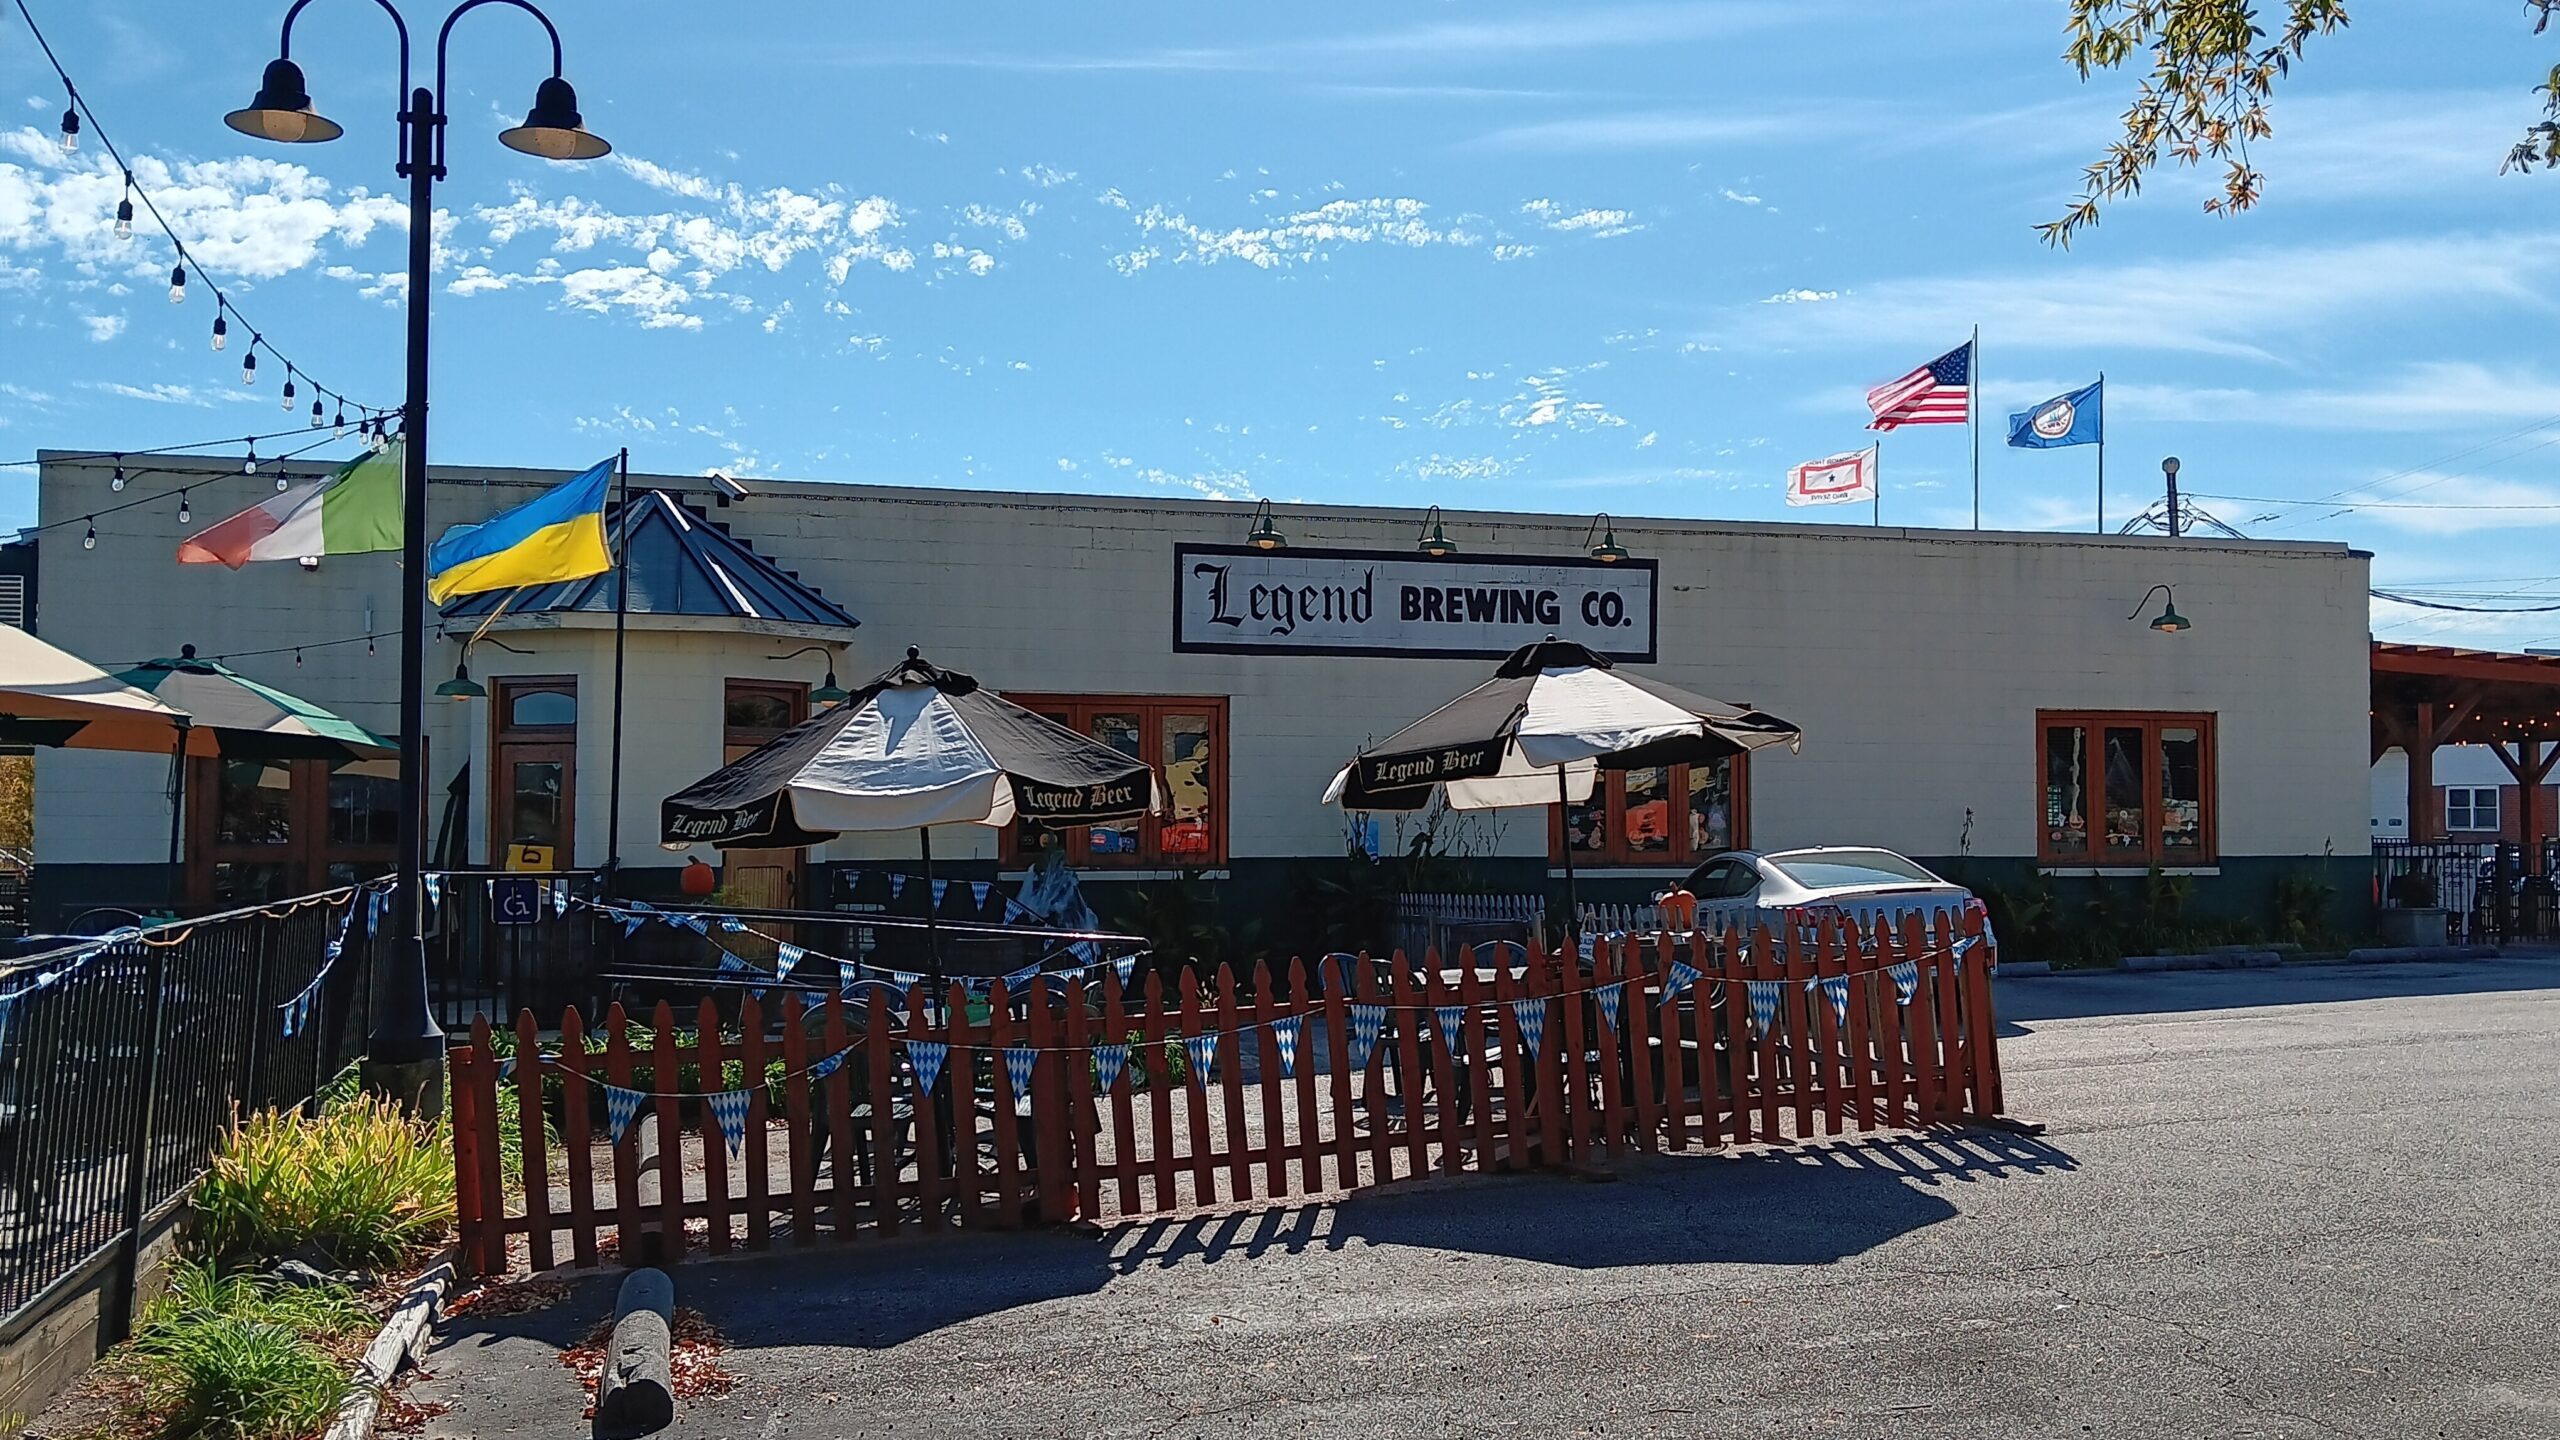 Legend Brewery cropped to scale